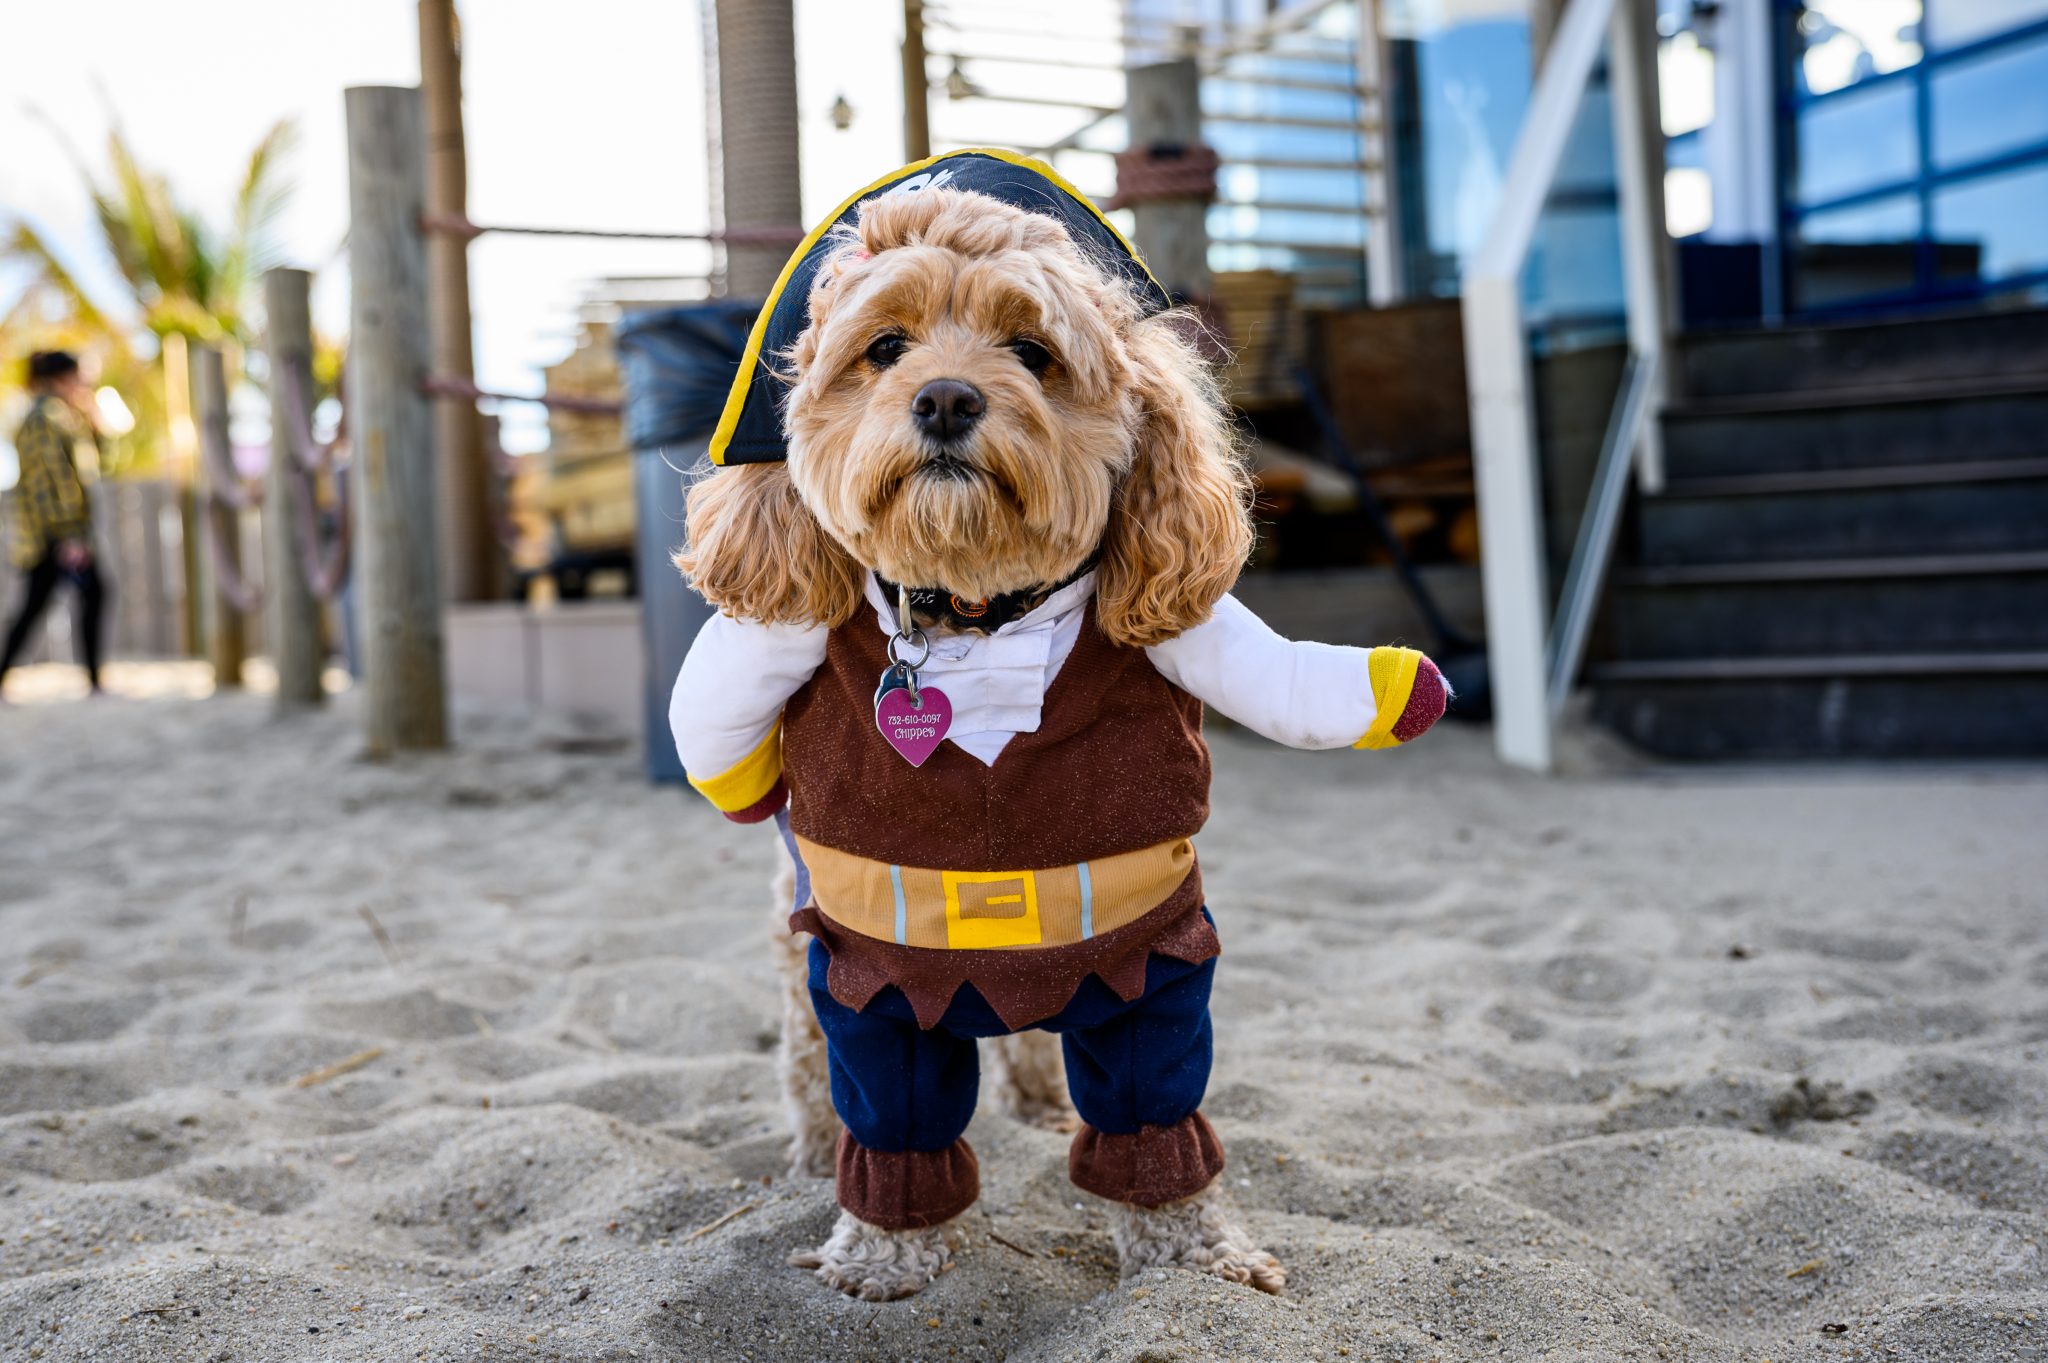 A pirate dog enjoying the beach, wearing a pirate costume with a hat and an eyepatch.